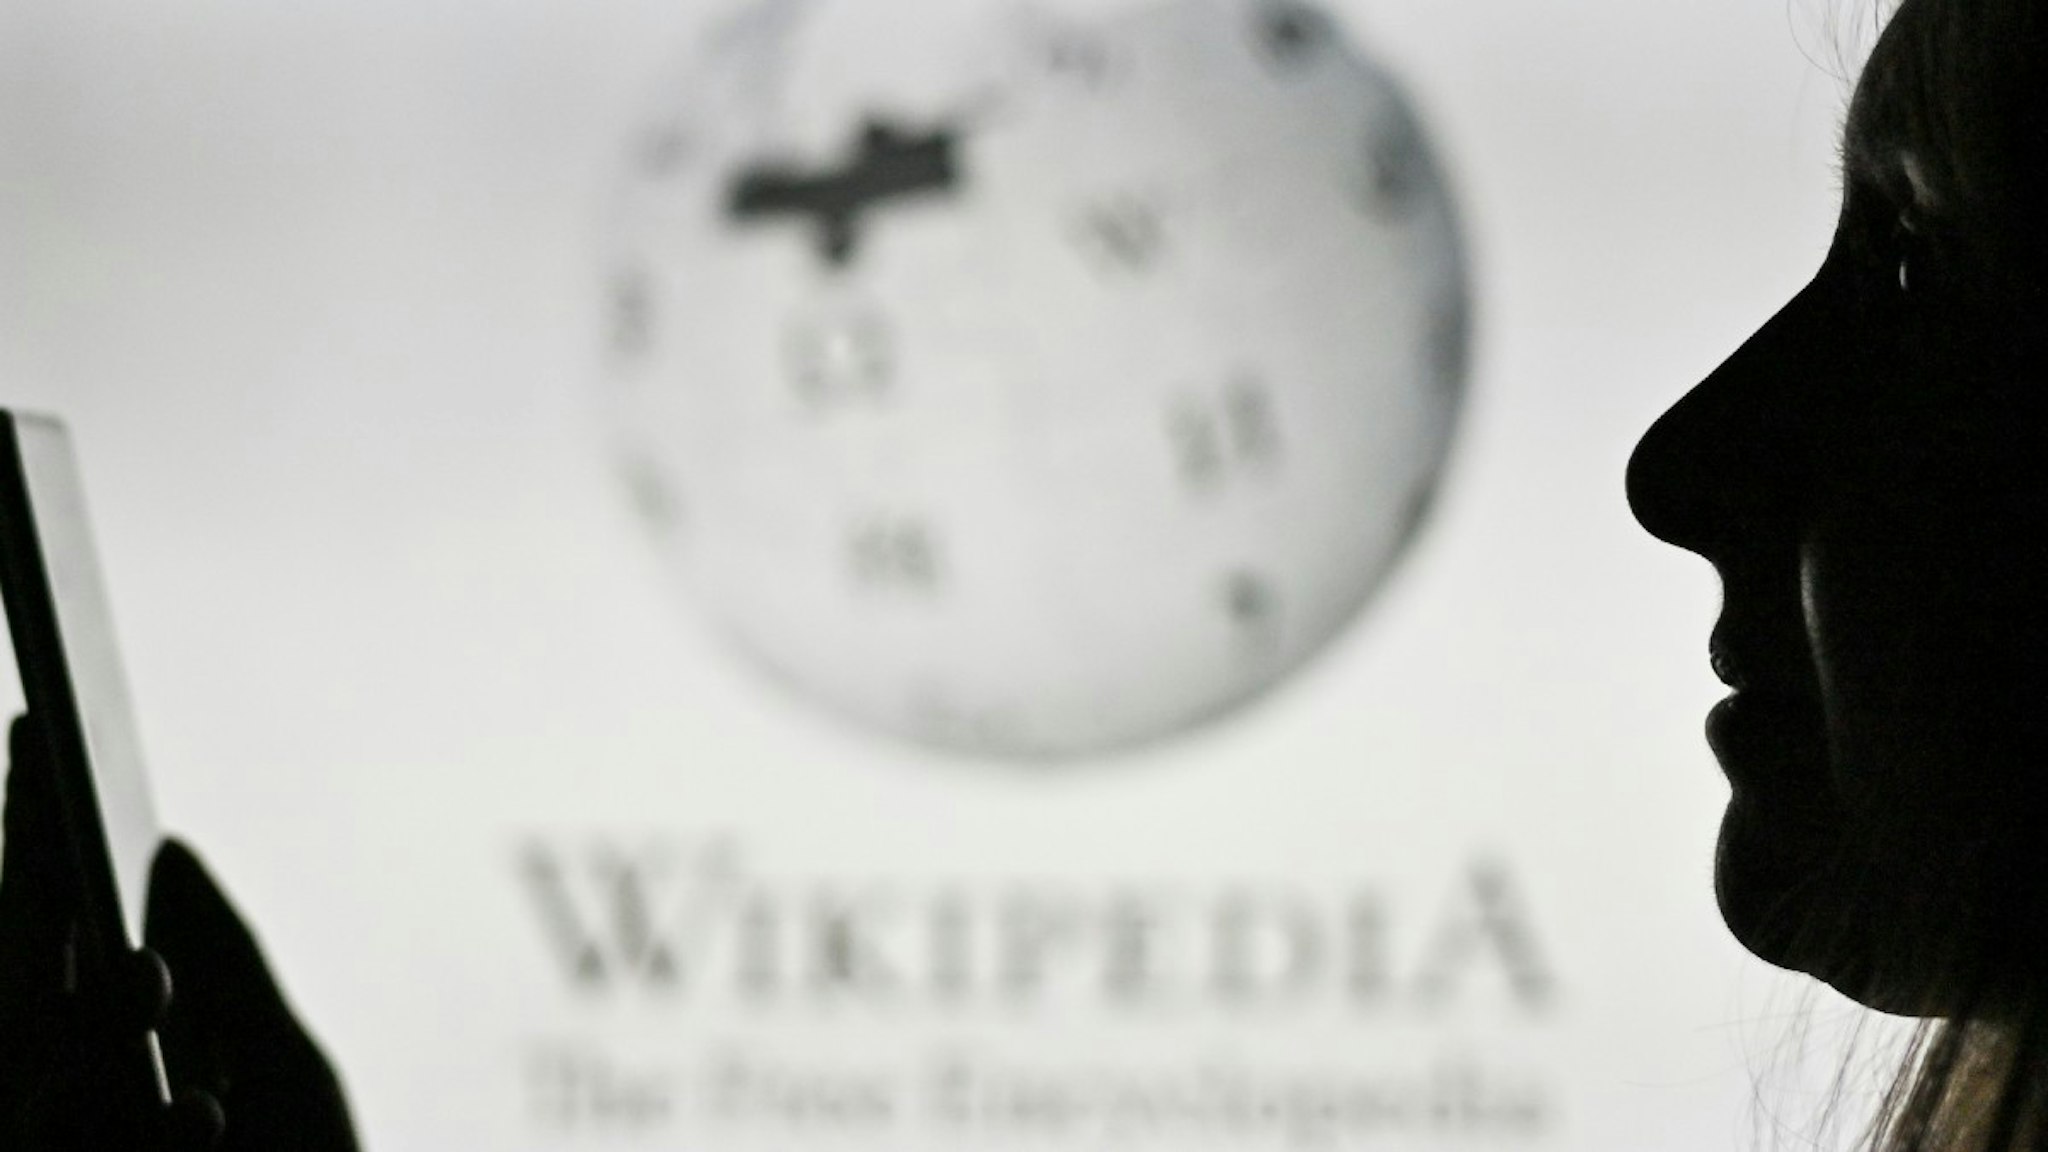 An image of a woman holding a cell phone in front of the Wikipedia logo displayed on a computer screen. On Tuesday, January 12, 2021, in Edmonton, Alberta, Canada.